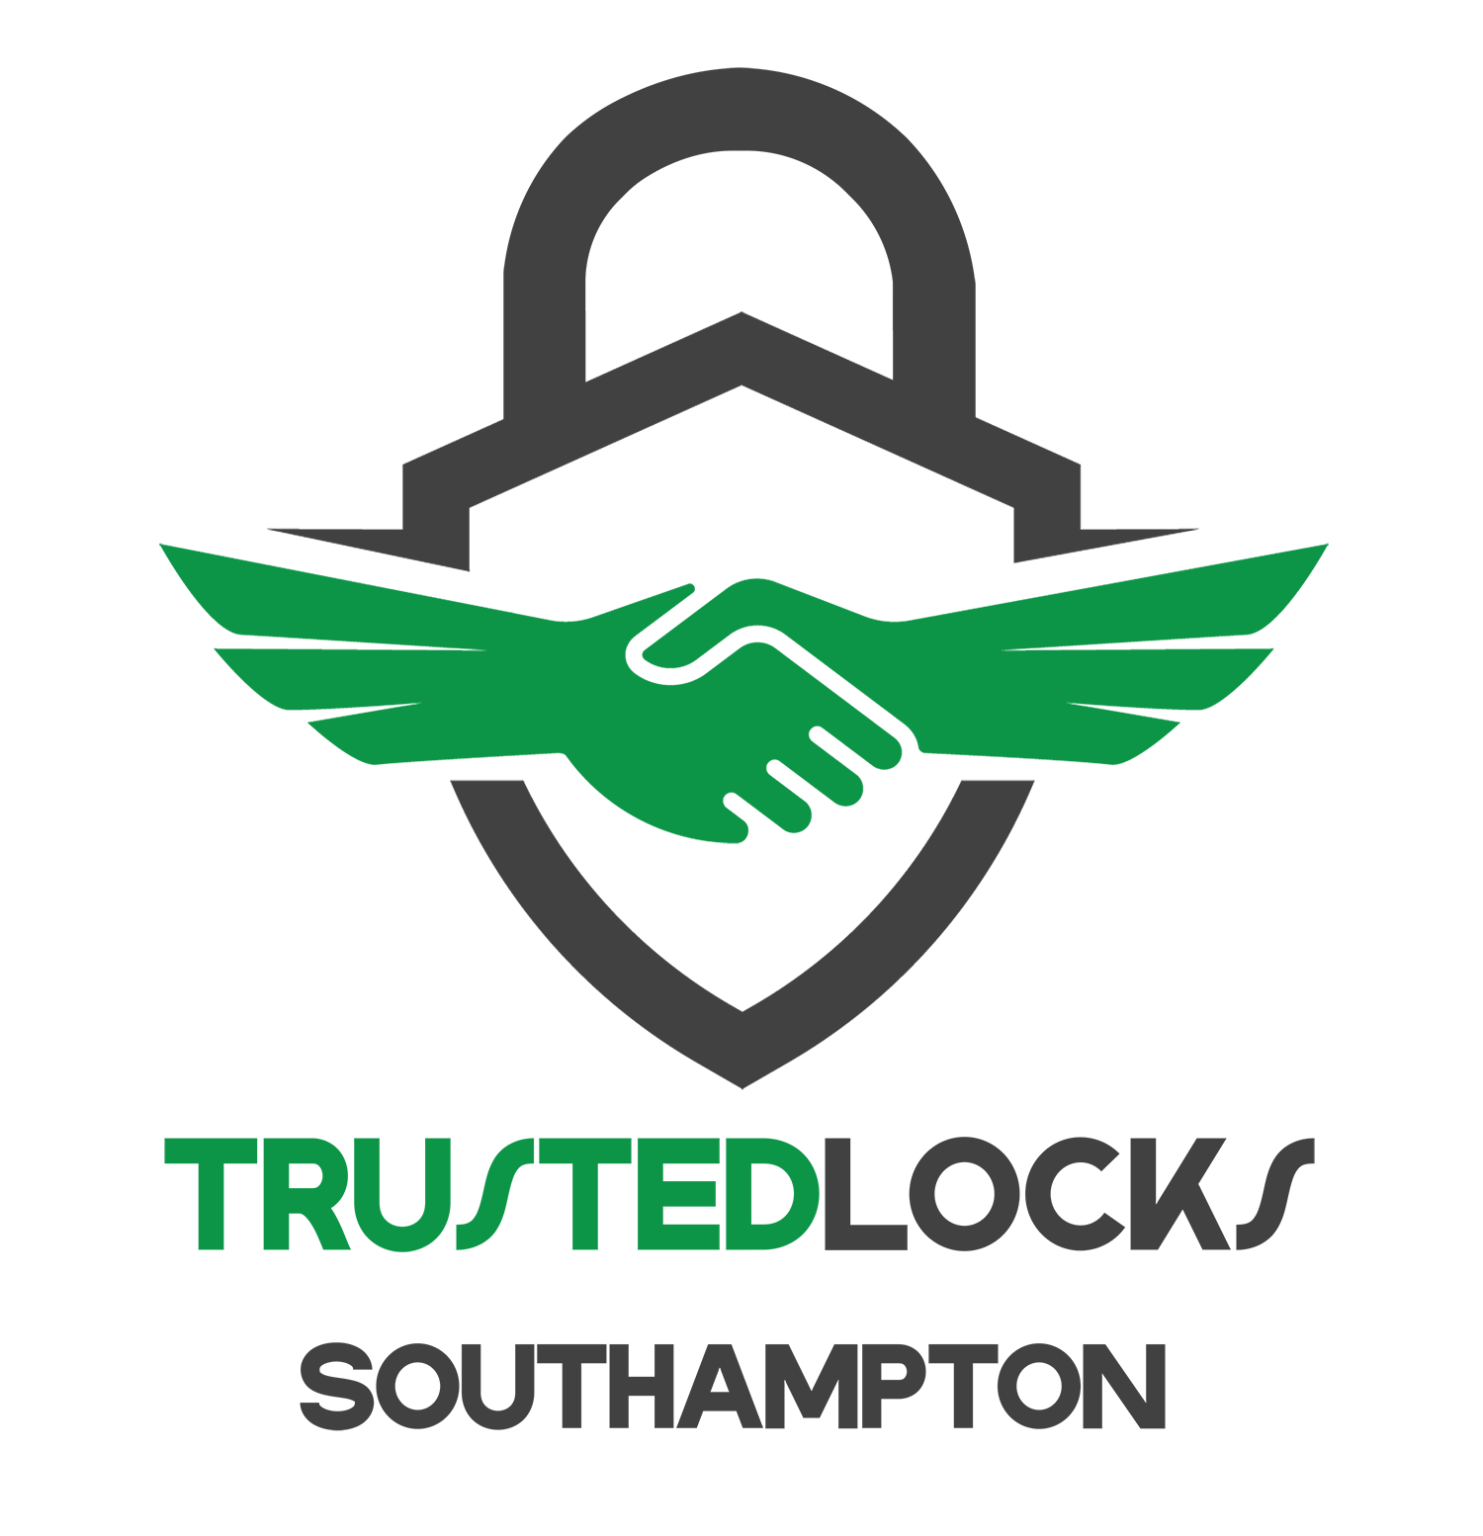 Locksmith Service is provided here